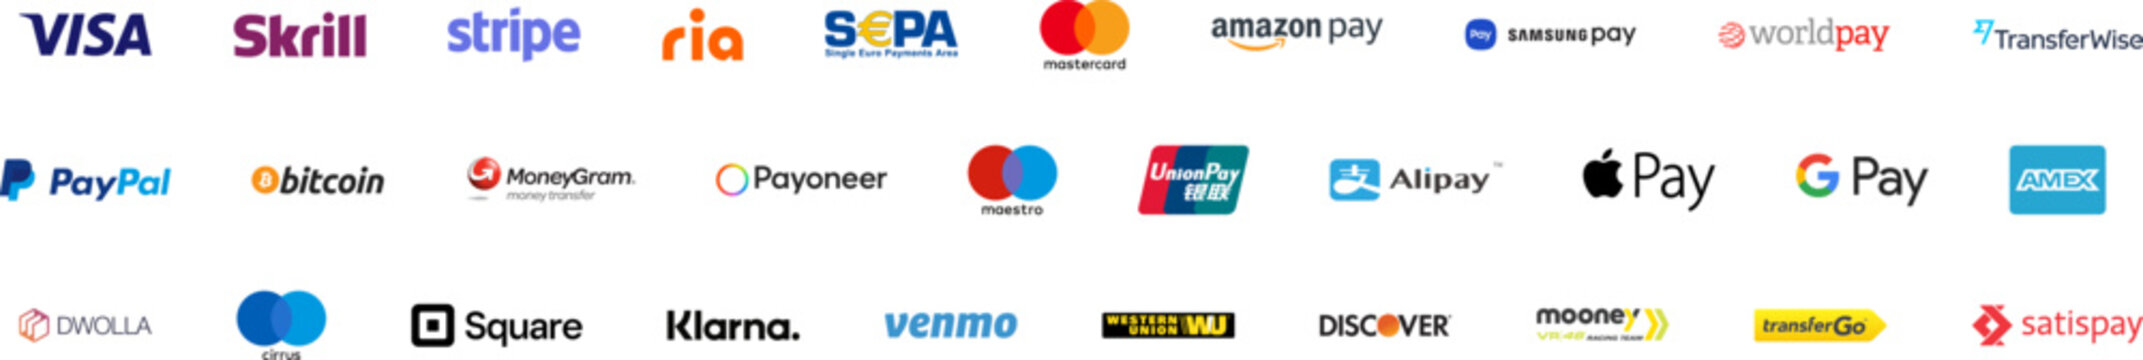 Popular online payment methods logo with white background. Transparent with vector logotype gateway icon set for website.